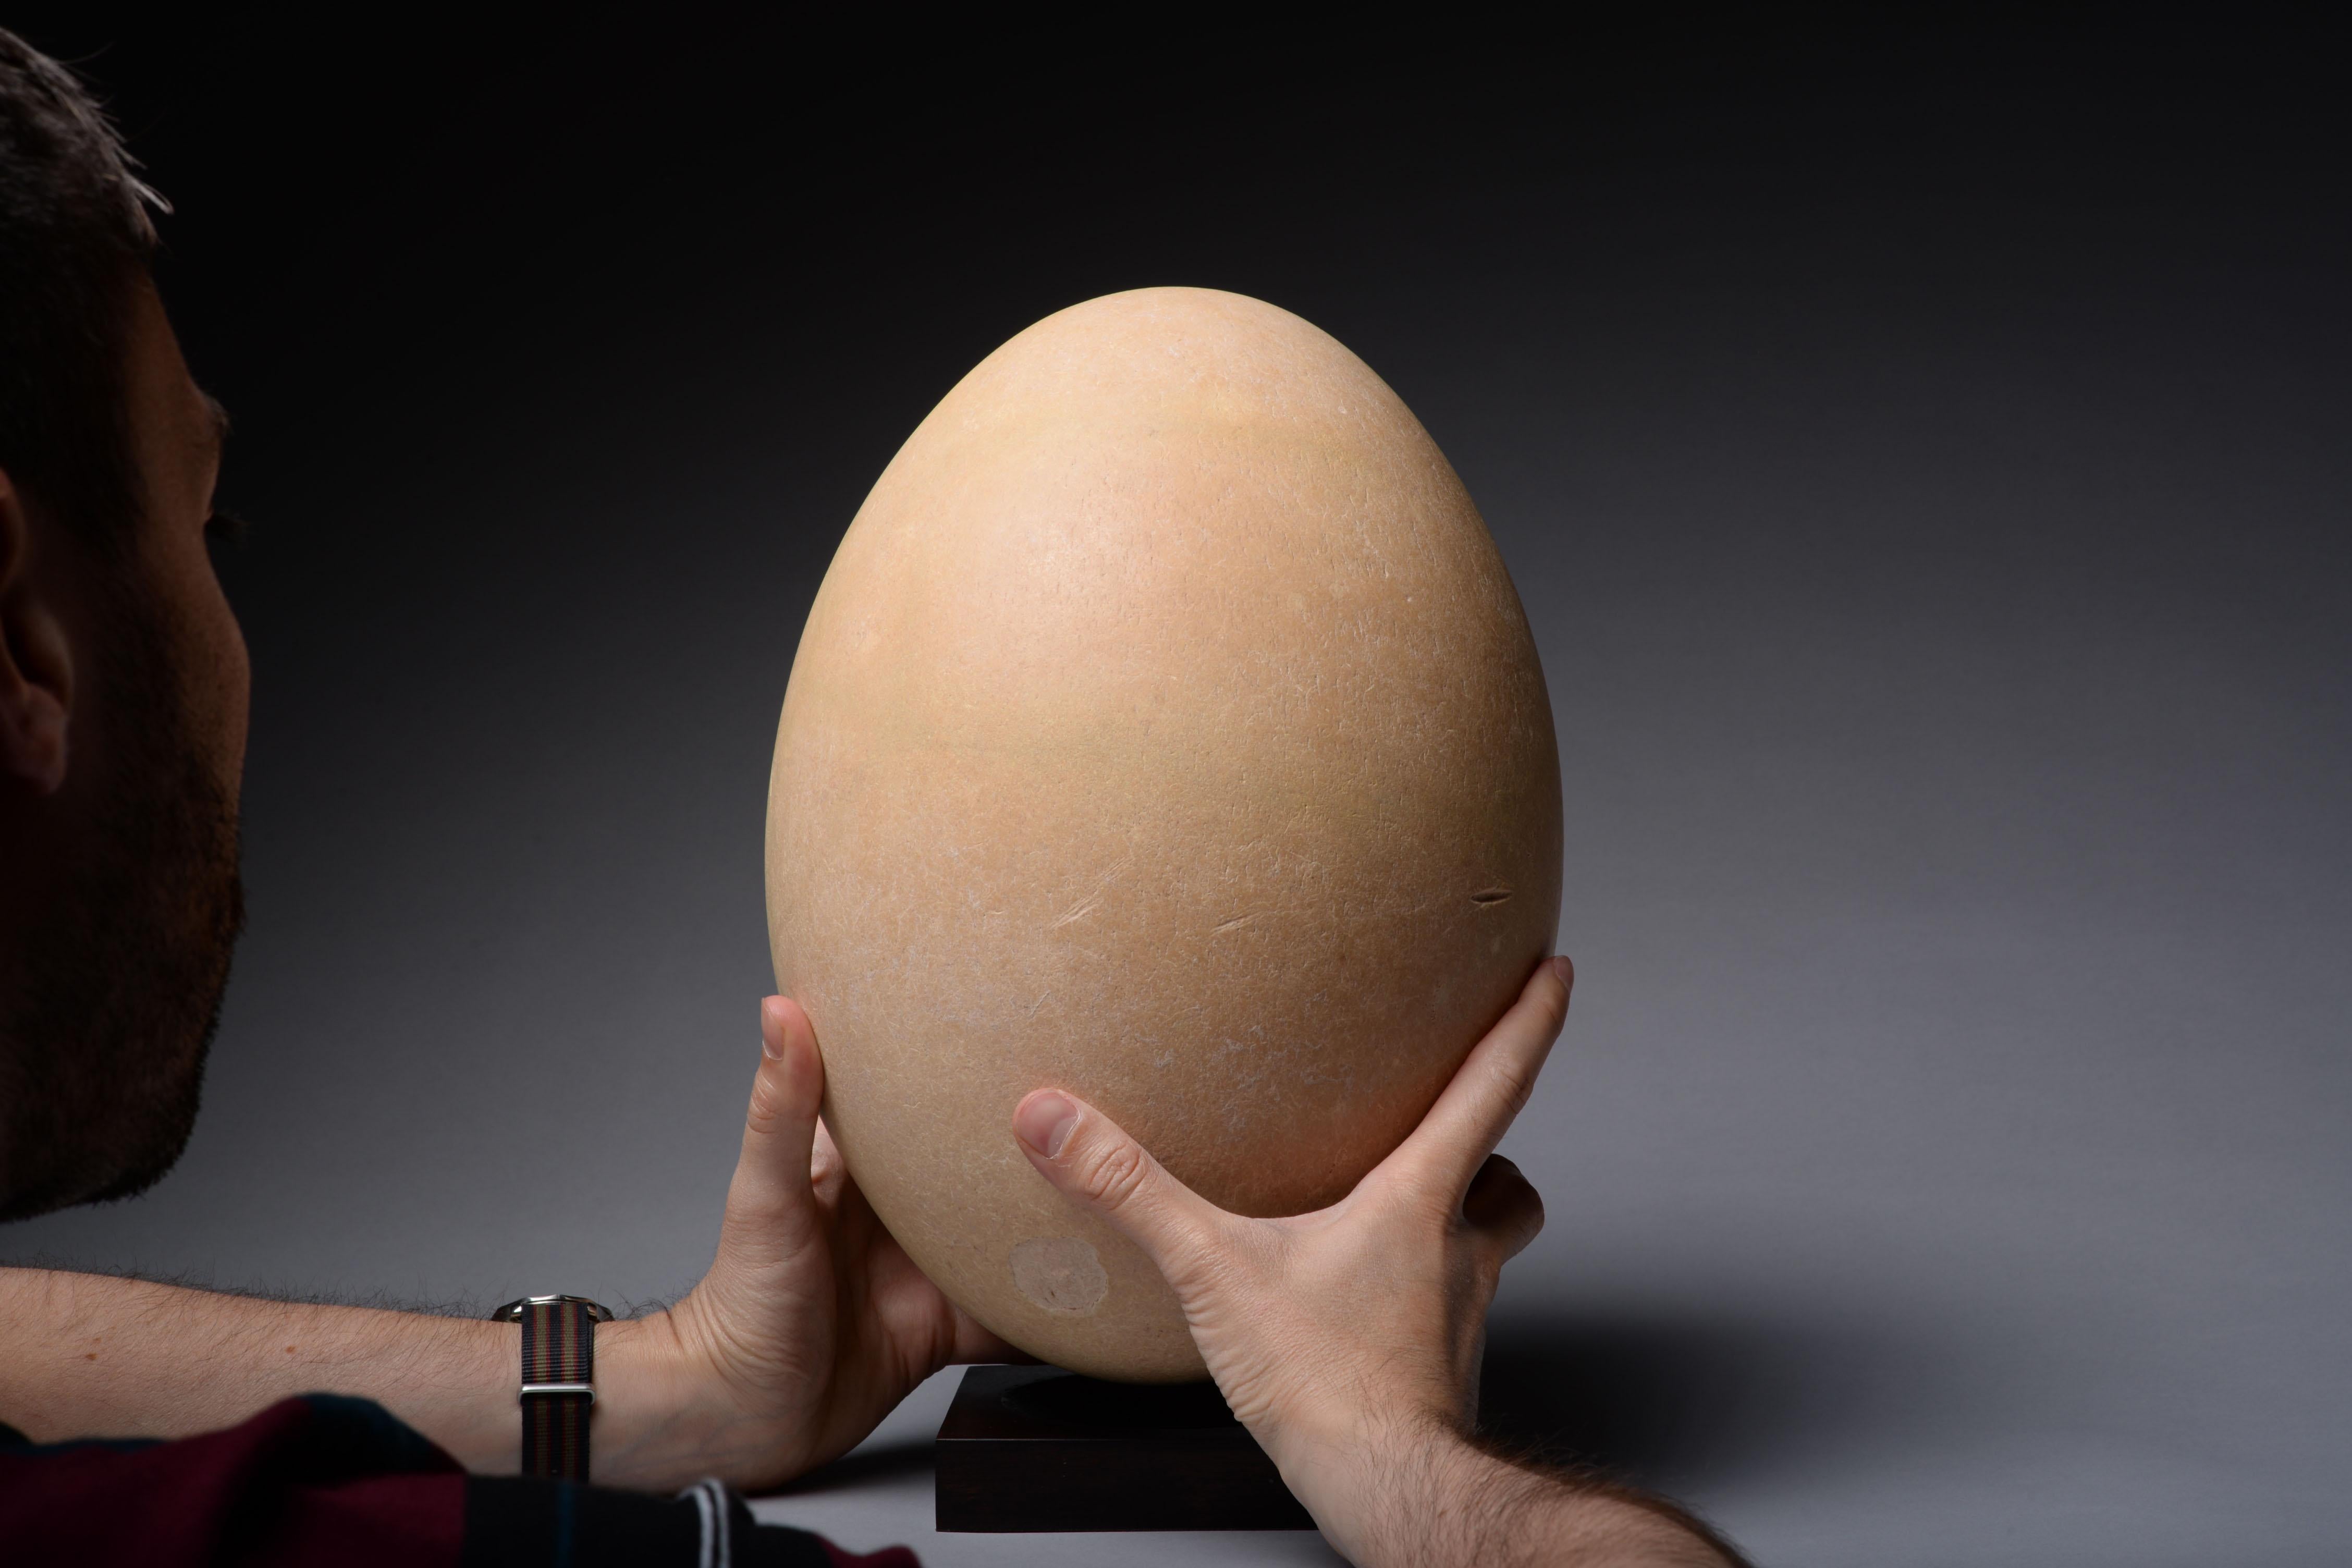 Largest Egg Ever Laid - Elephant Bird Egg - Sculpture by Unknown